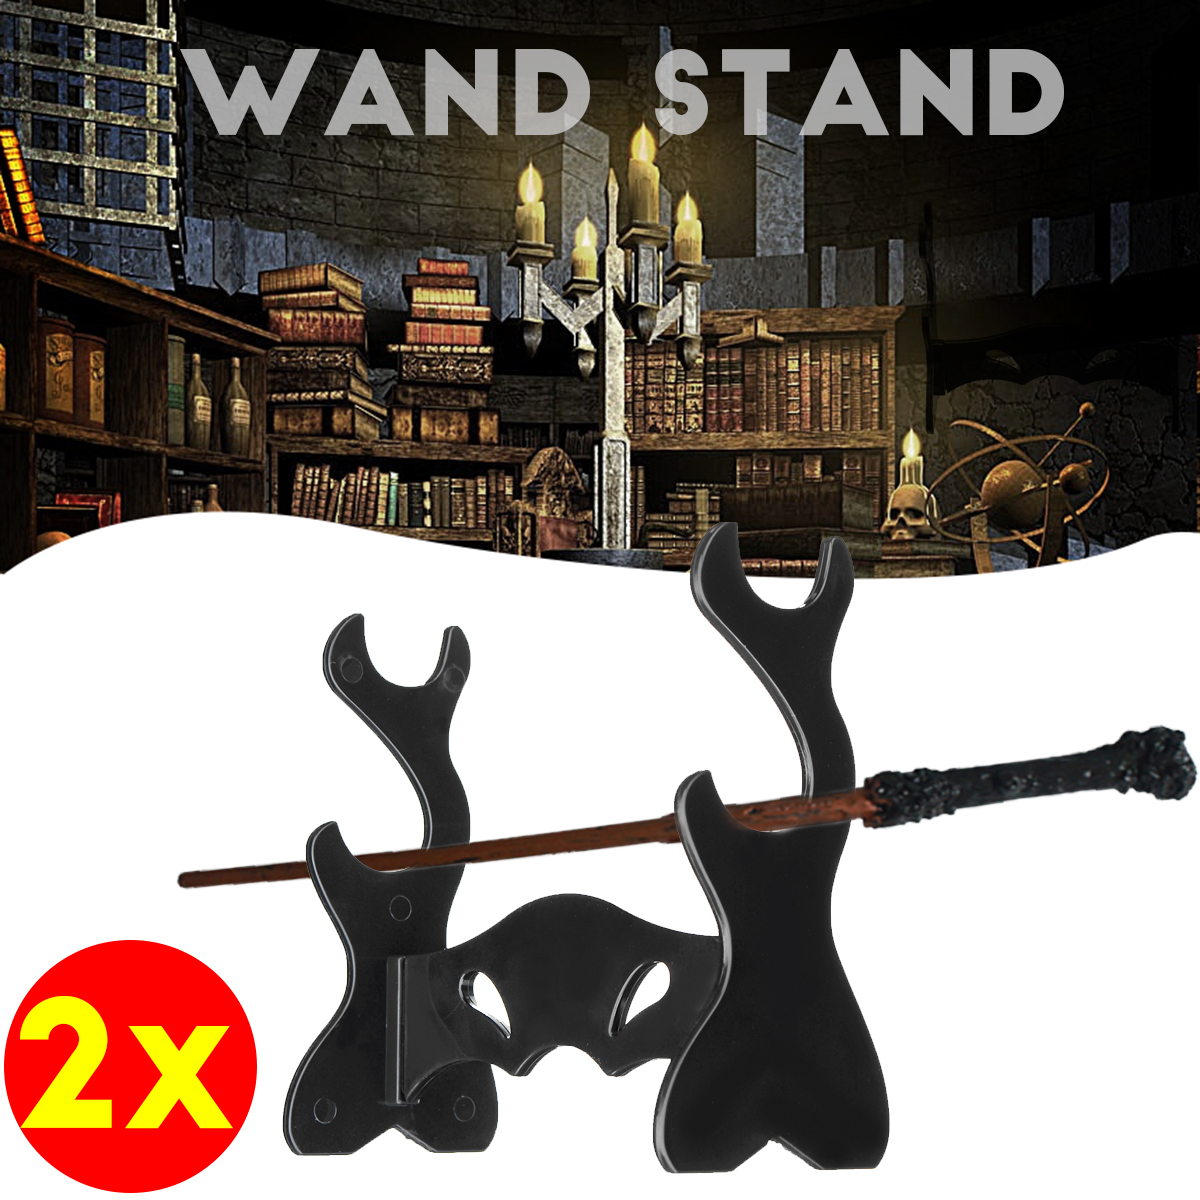 Black-Acrylic-Wizarding-Wand-Twig-Display-Stand-Tool-Holder-for-Wizard-1633380-1